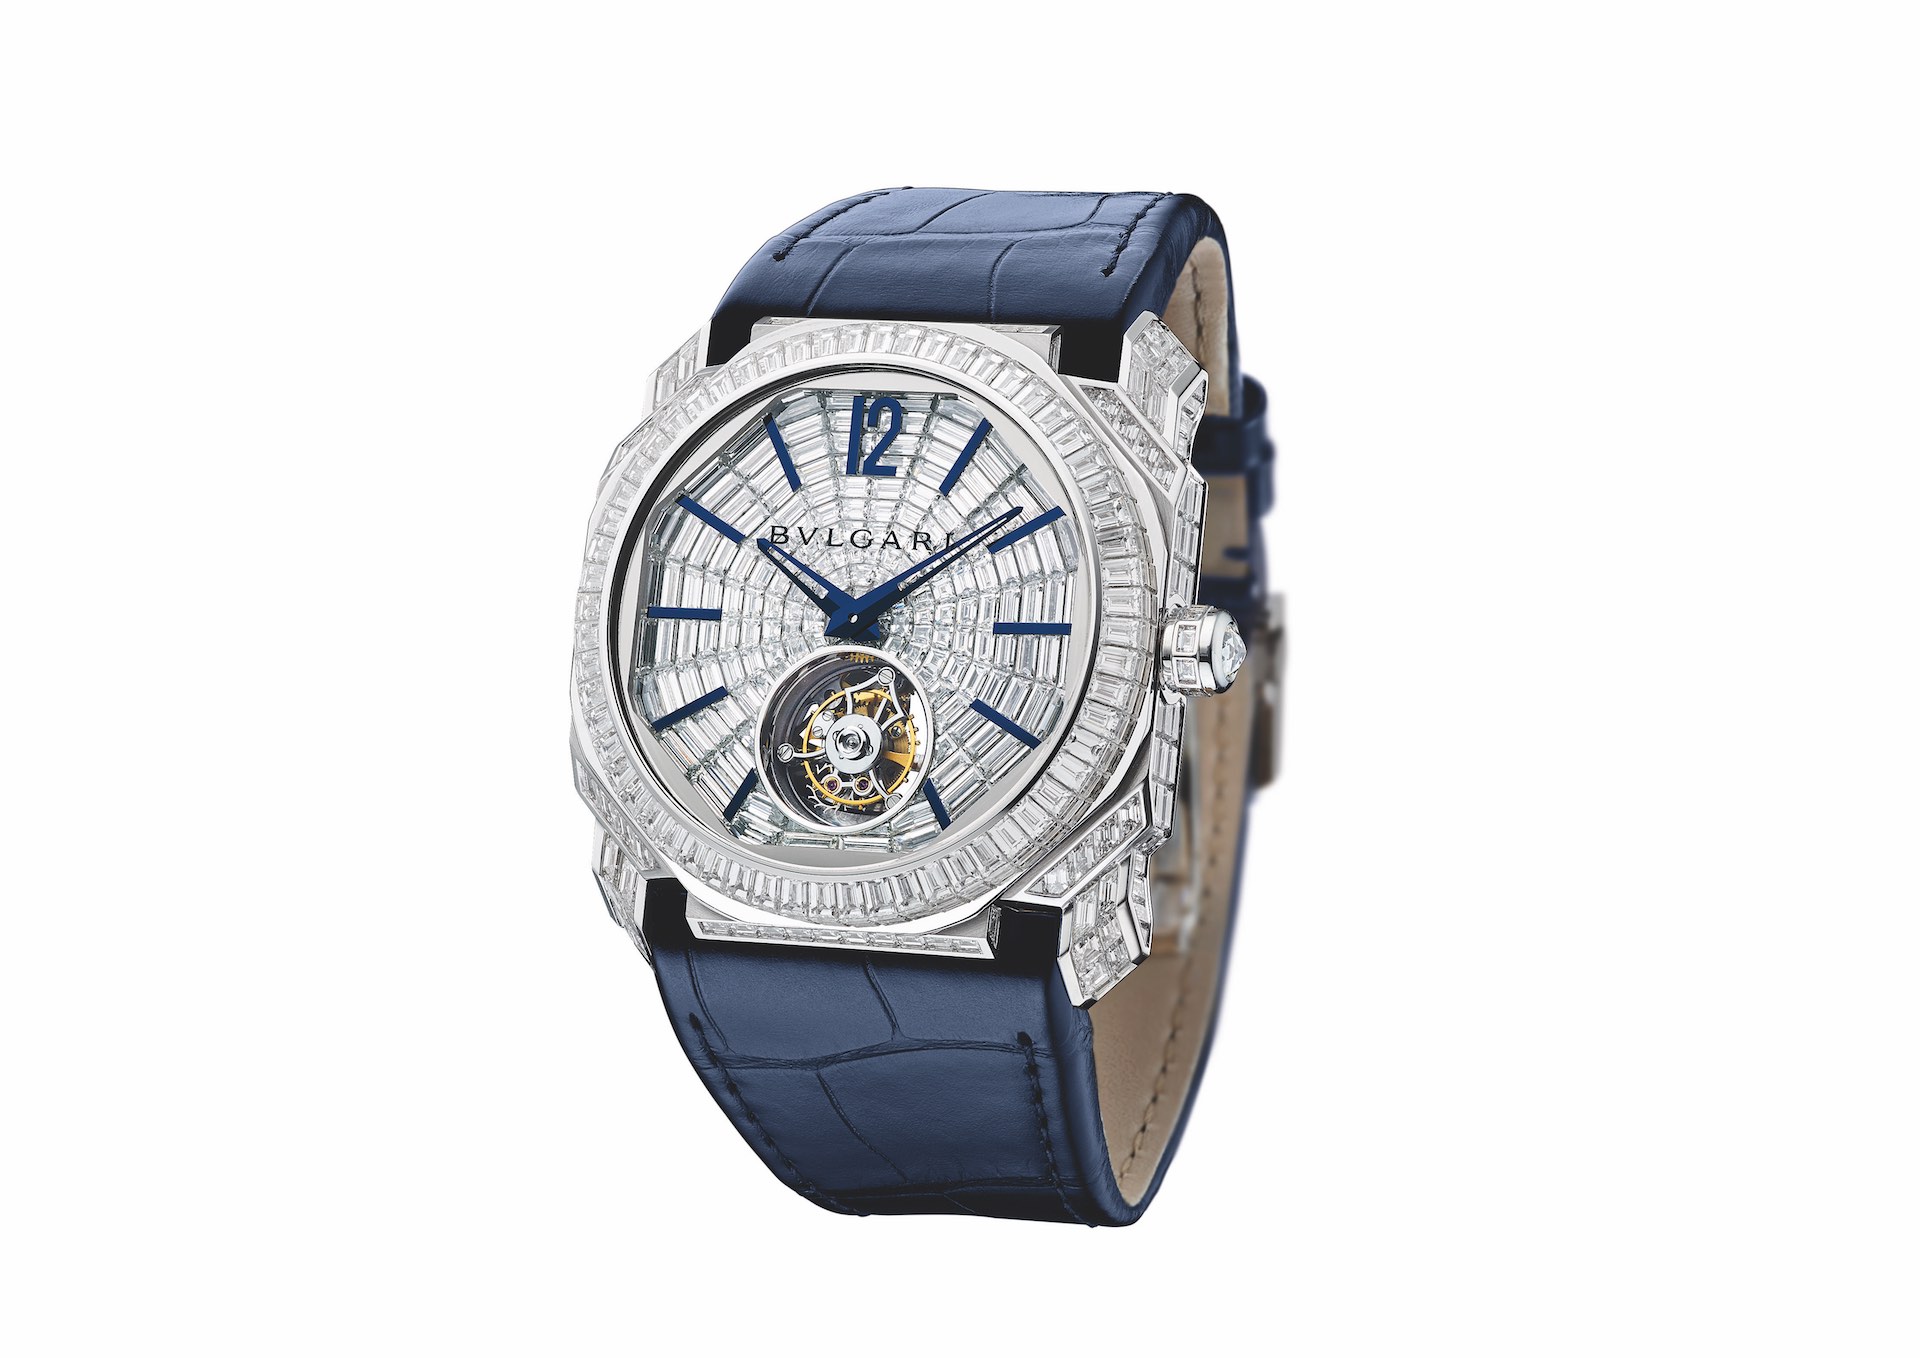 Bulgari Shanghai Collection Of High Jewelry Watches | aBlogtoWatch